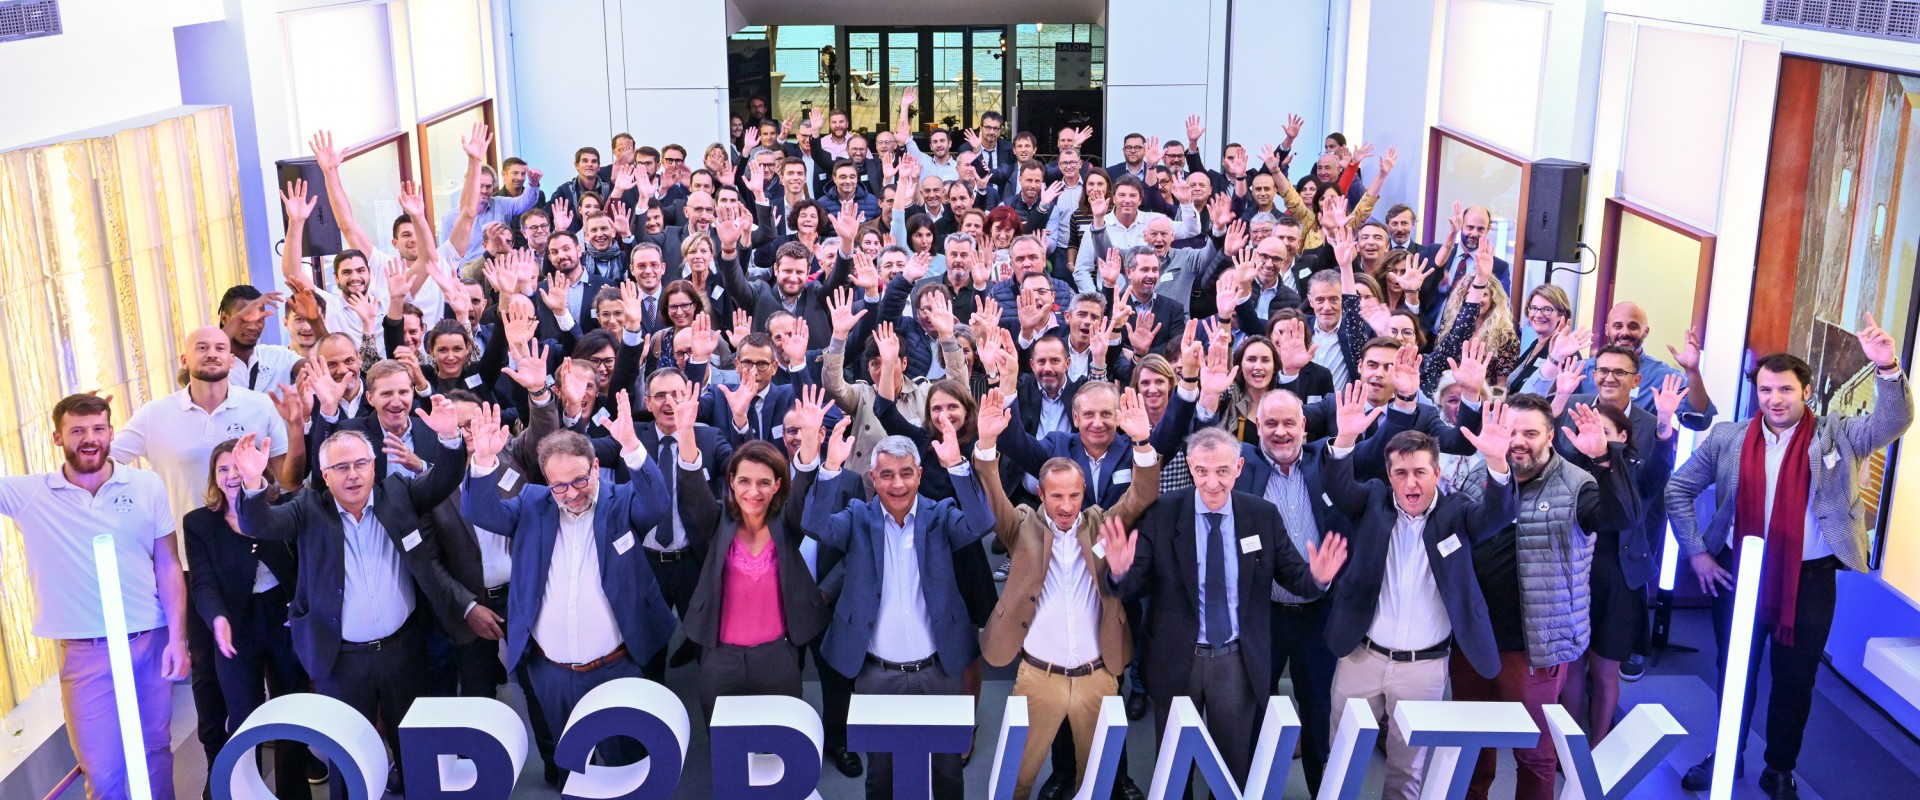 OPORTUNITY: The New Dynamic of Greater Western France’s Port Collective